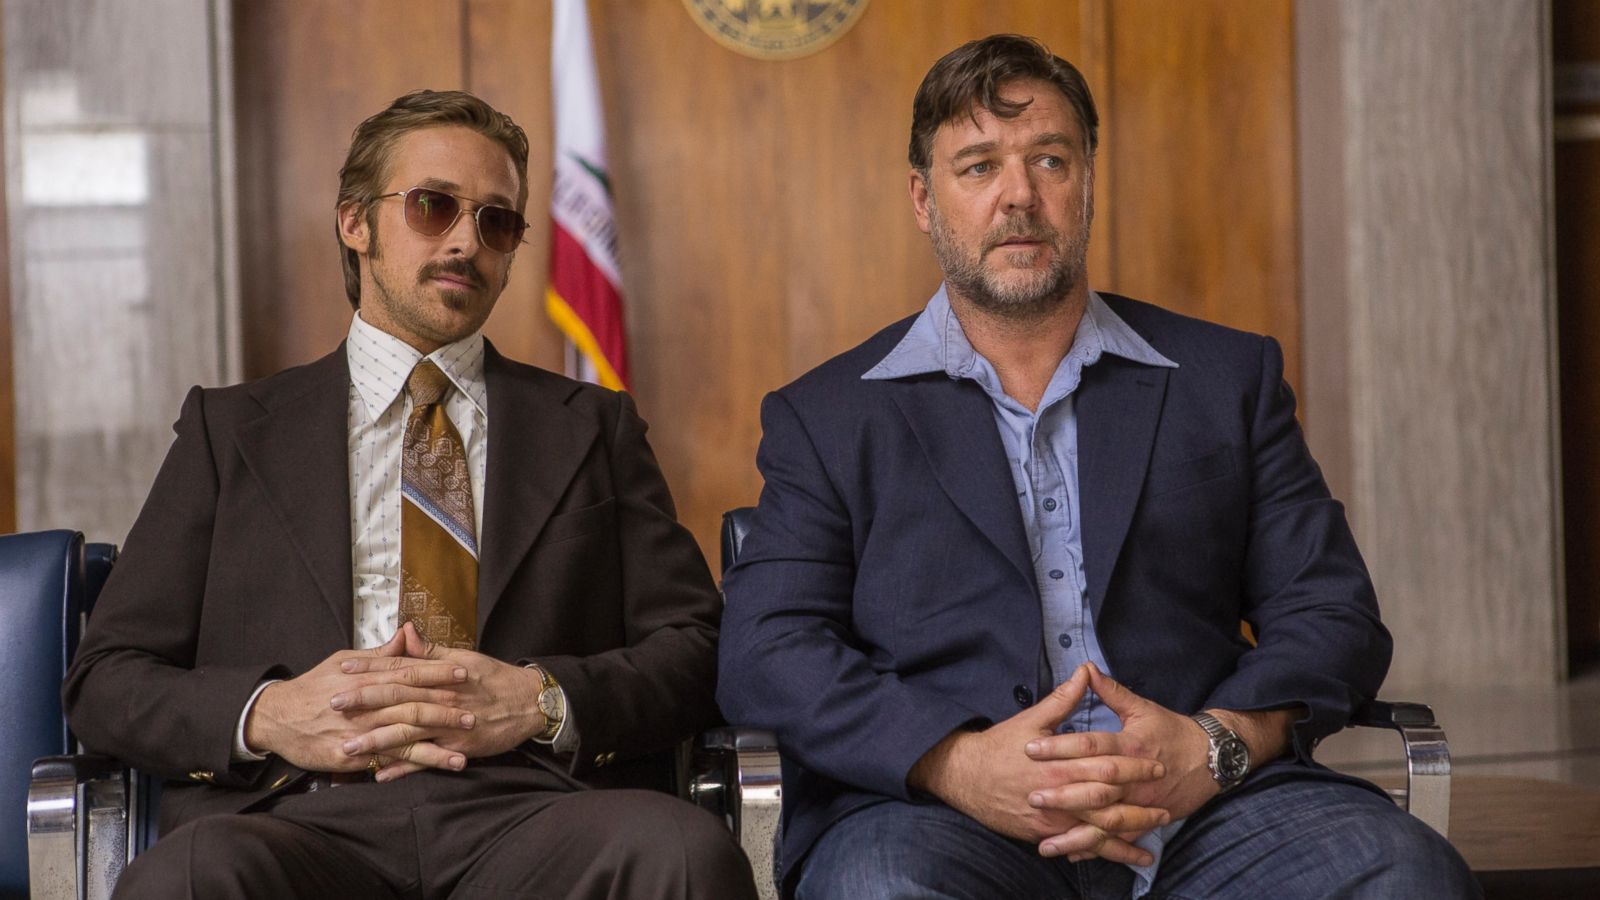 Prosecutor played by Russell Crowe stole from his law clients